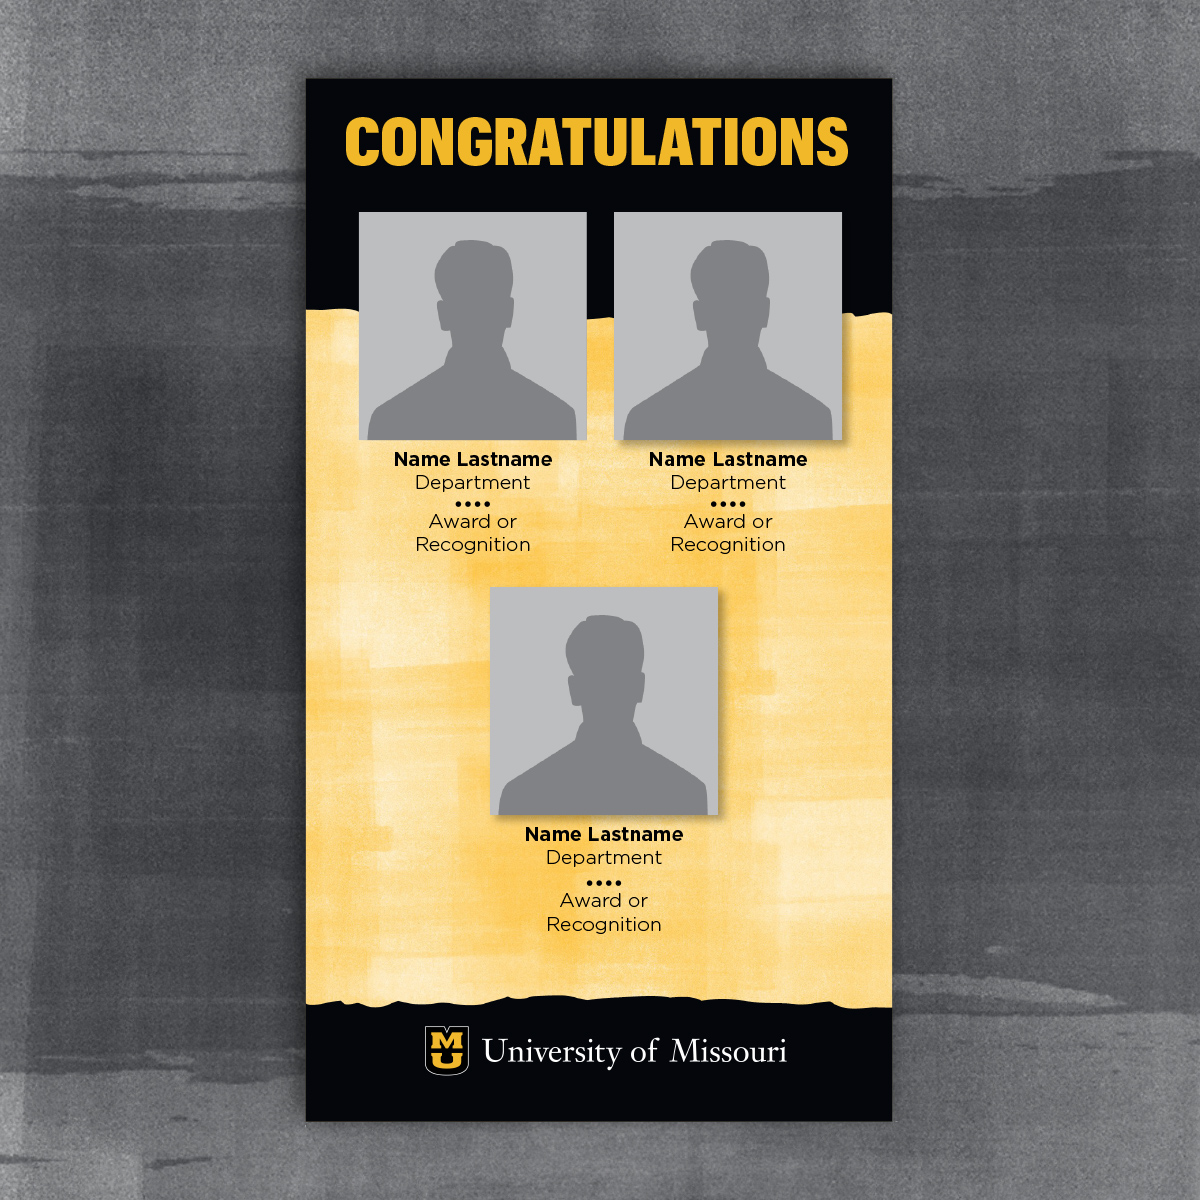 Vertical congratulations slide for multiple square portraits. Black page tears and gold background